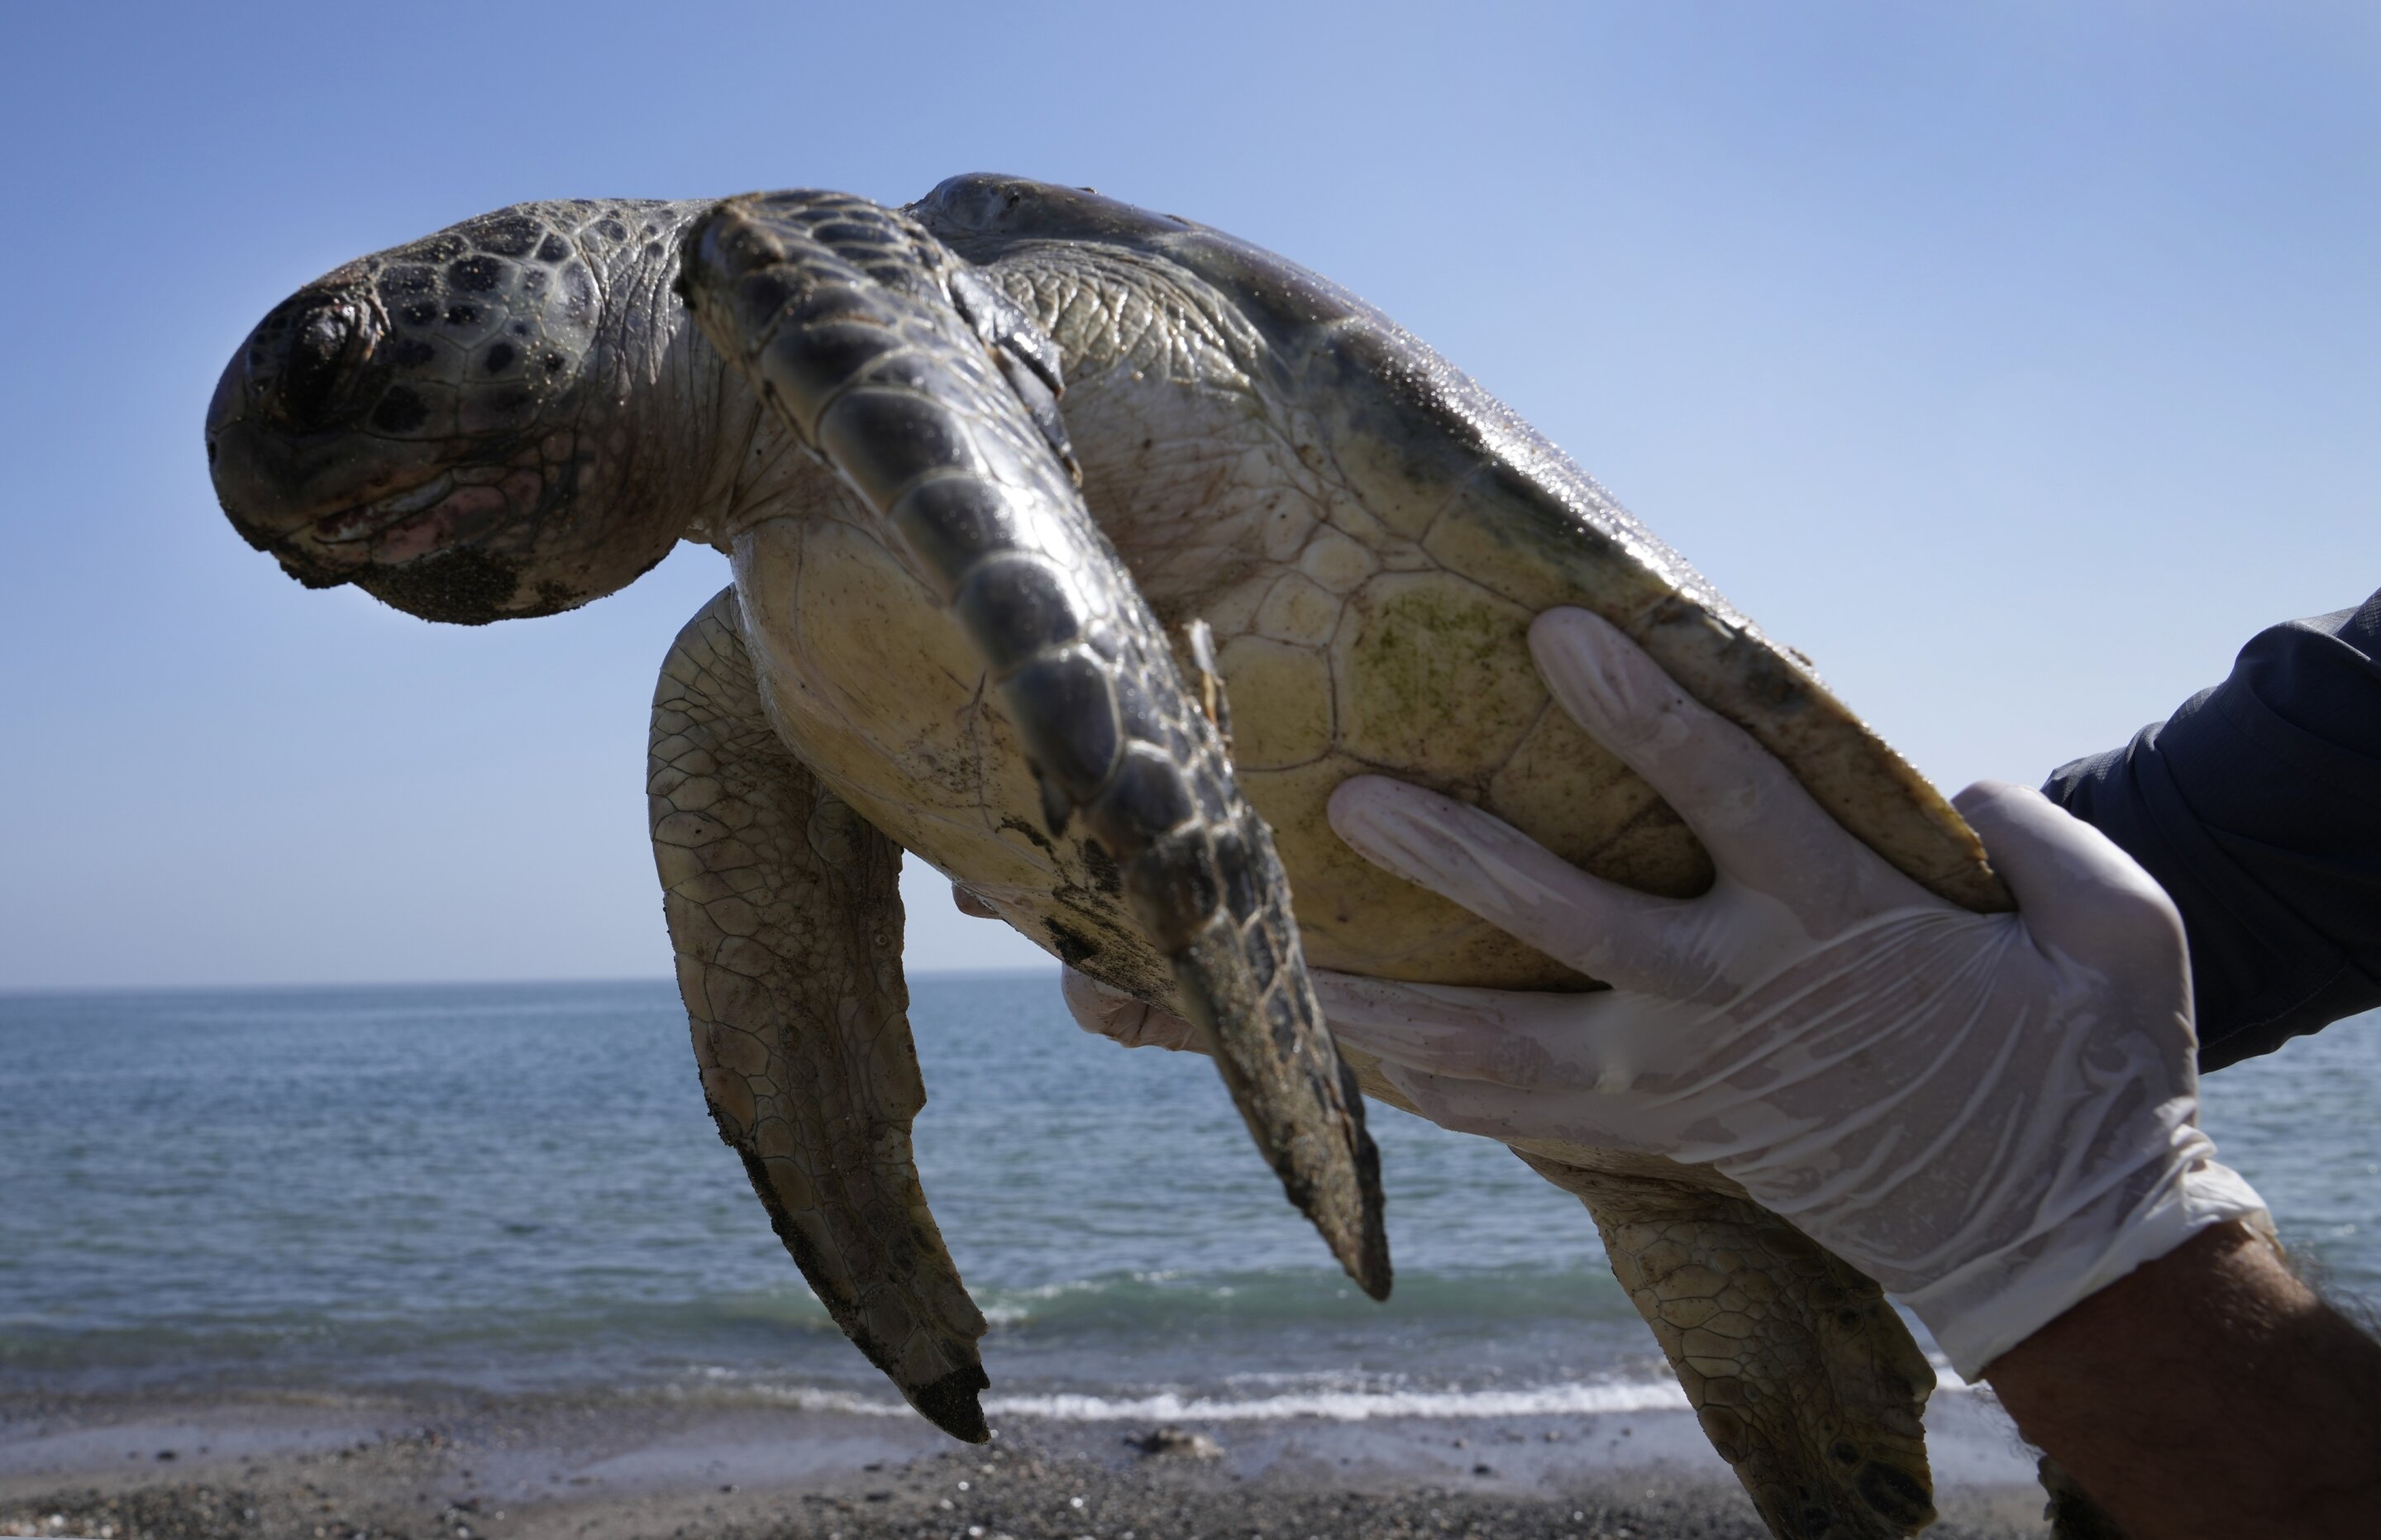 Plastic underwater pollution problem. Sea Turtle eating discarded